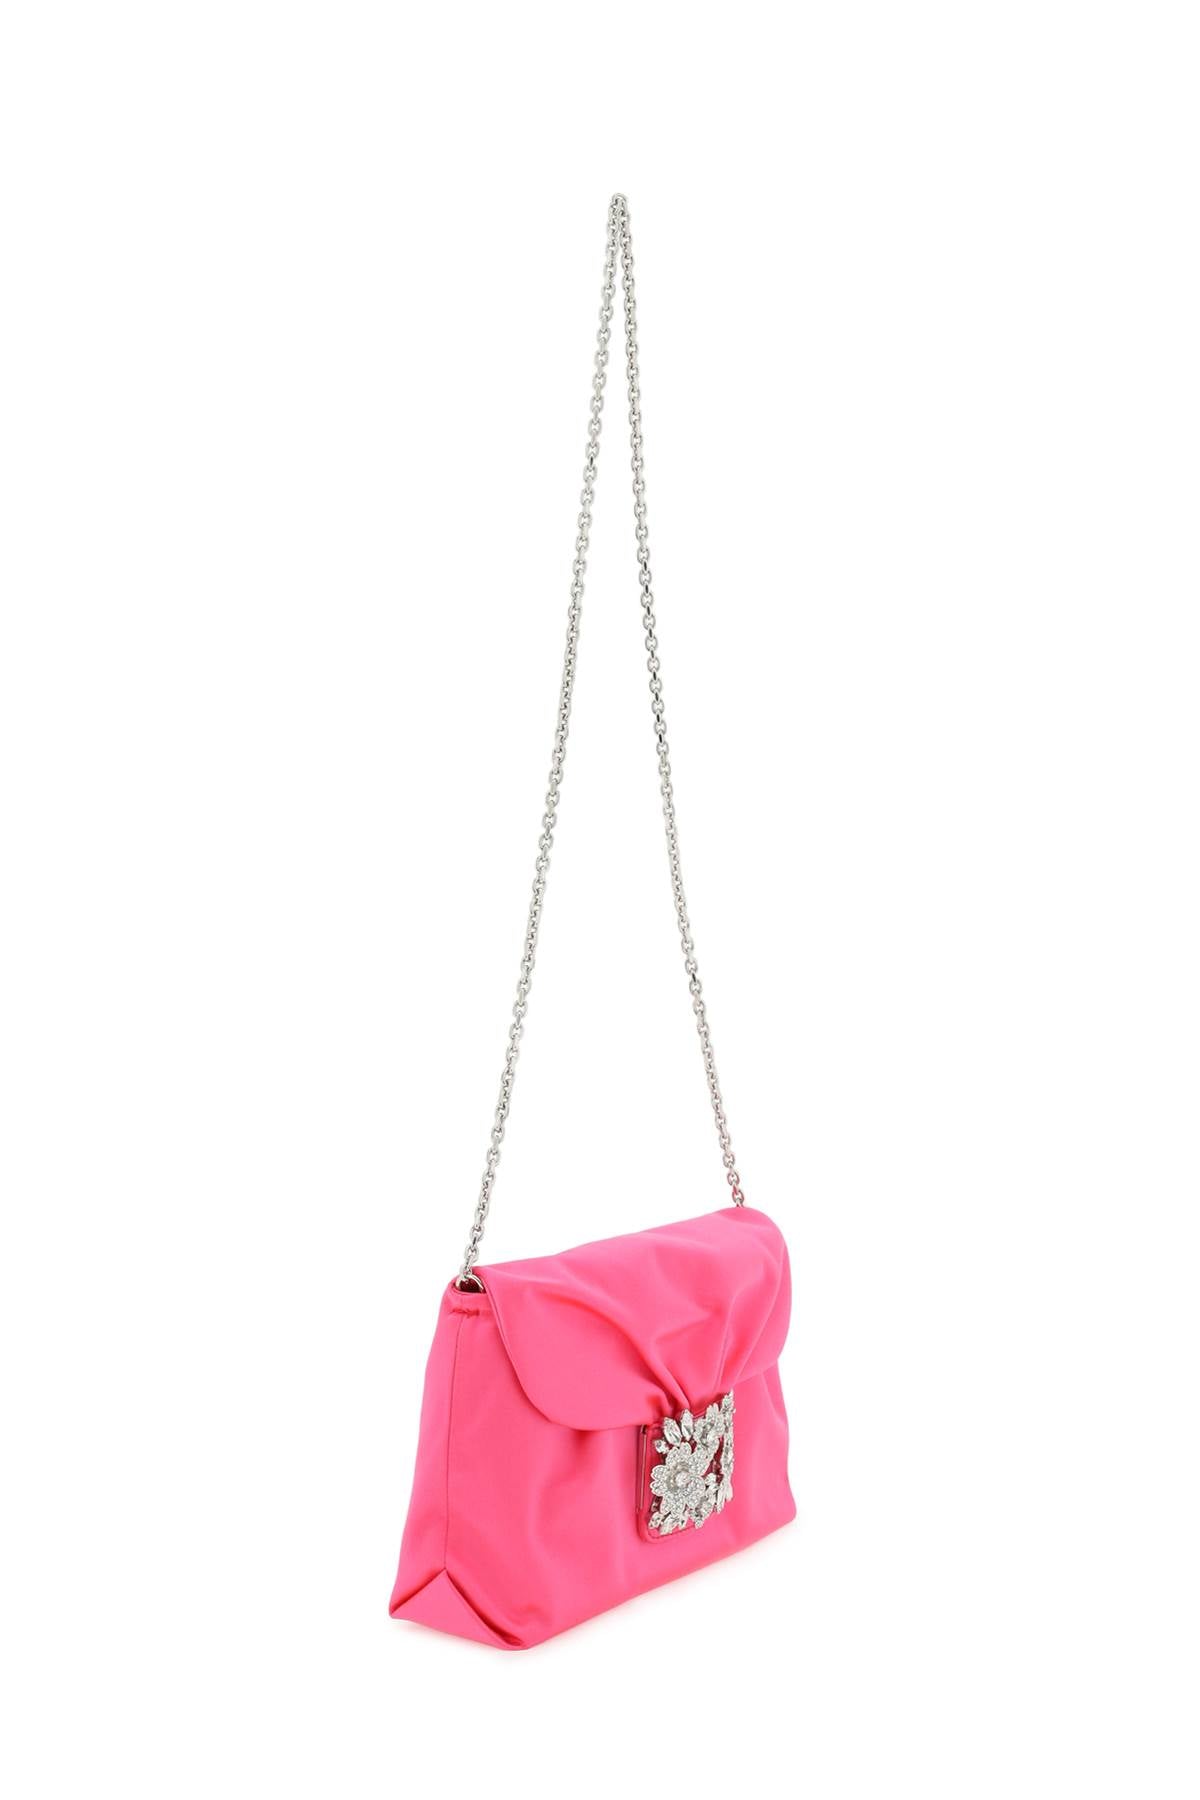 Feminine Pink Draped Mini Handbag for Women with Strass Buckle and Chain Strap